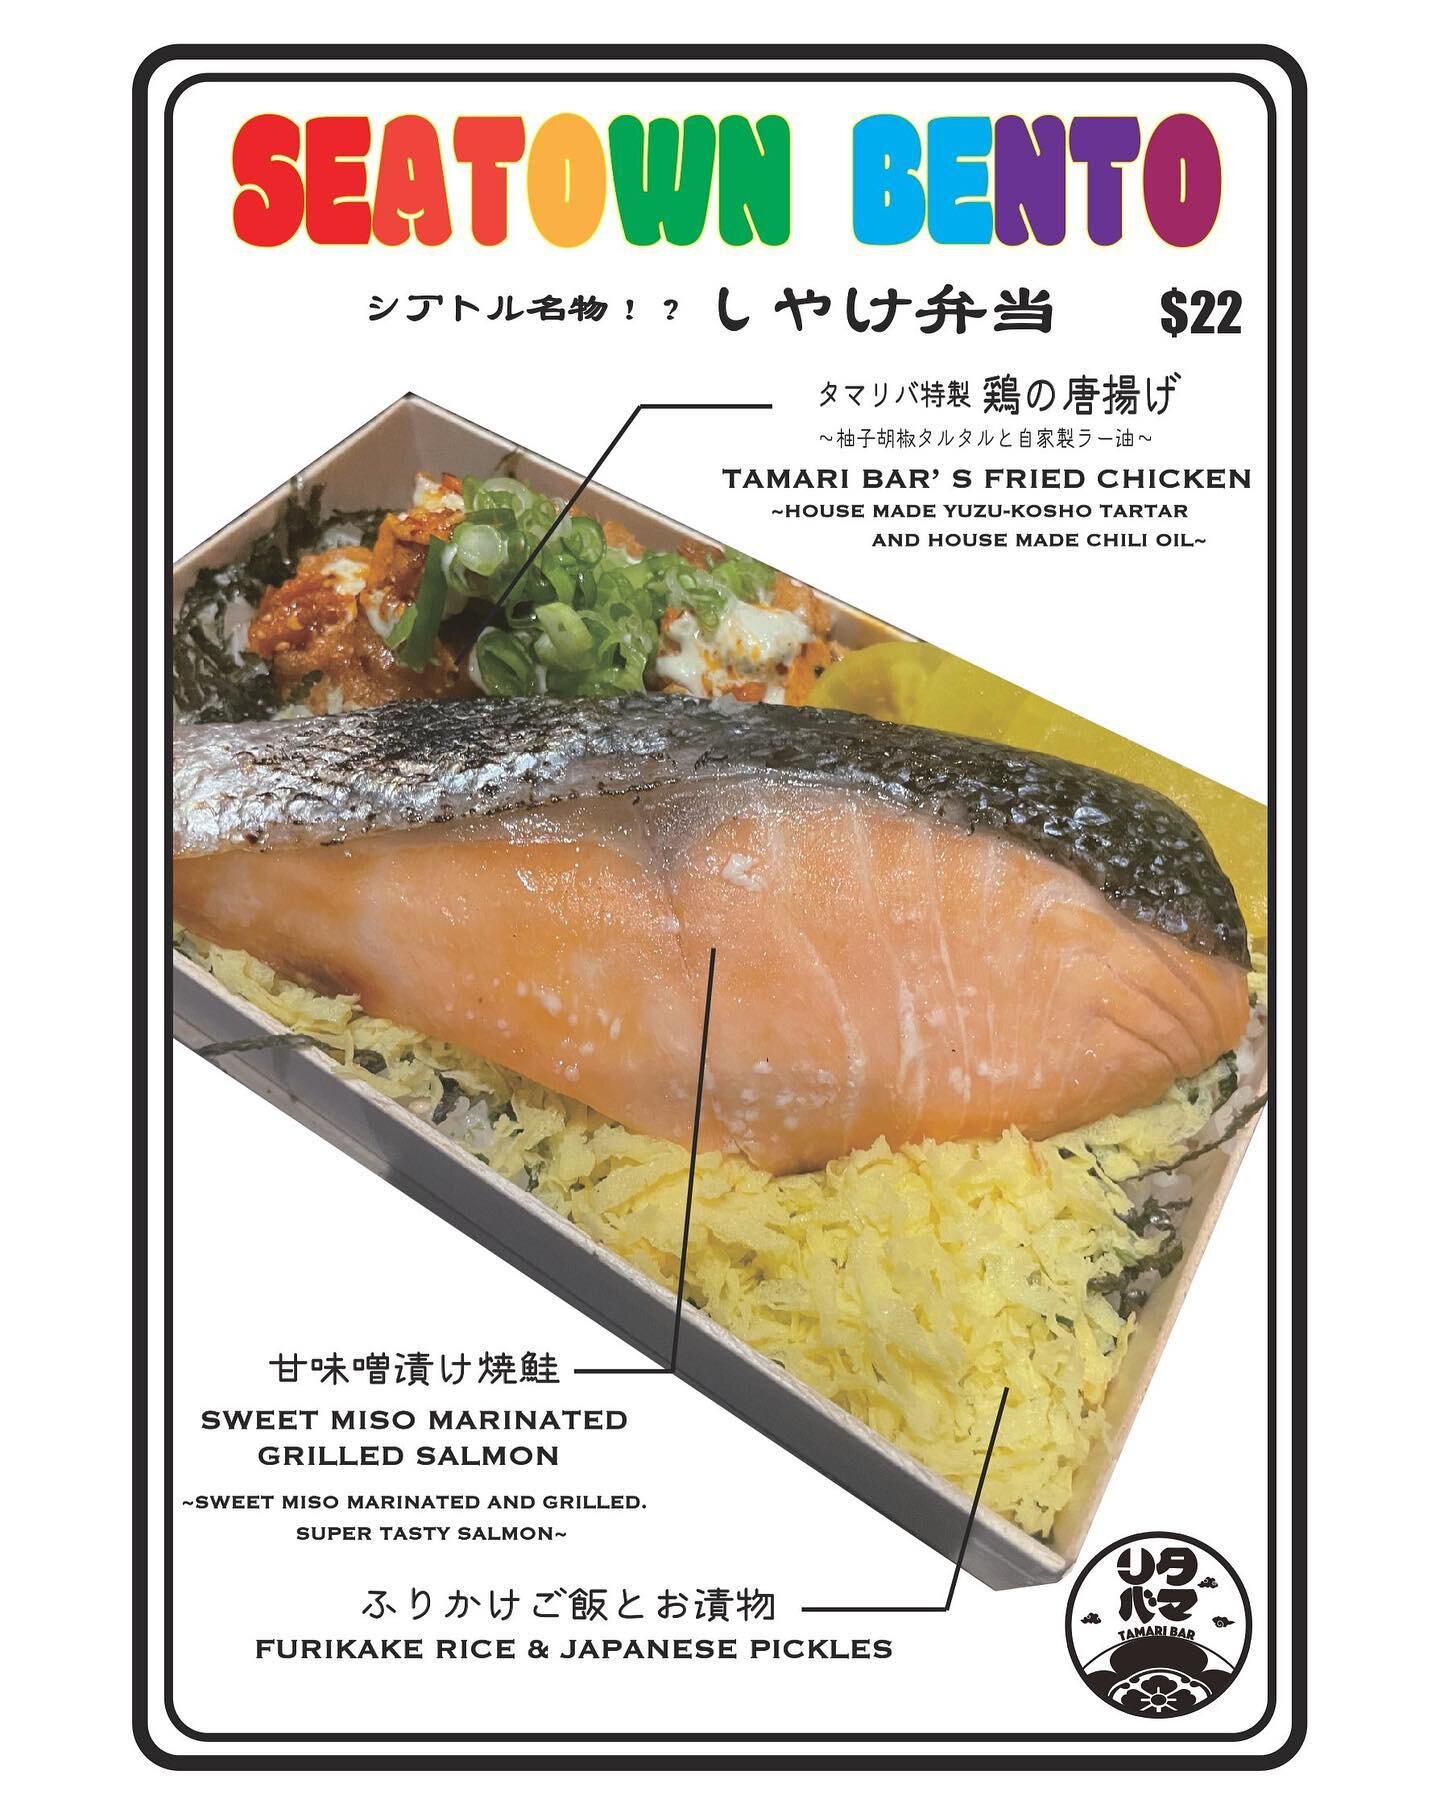 Check this #seatownbento out!!
＊this marinated and grilled salmon is too good...must have.

Now available for lunch for
#togo or #delivery by @doordash 
also you can get this from @baitenseattle window.

We also have a variety of #bentobox and #alaca